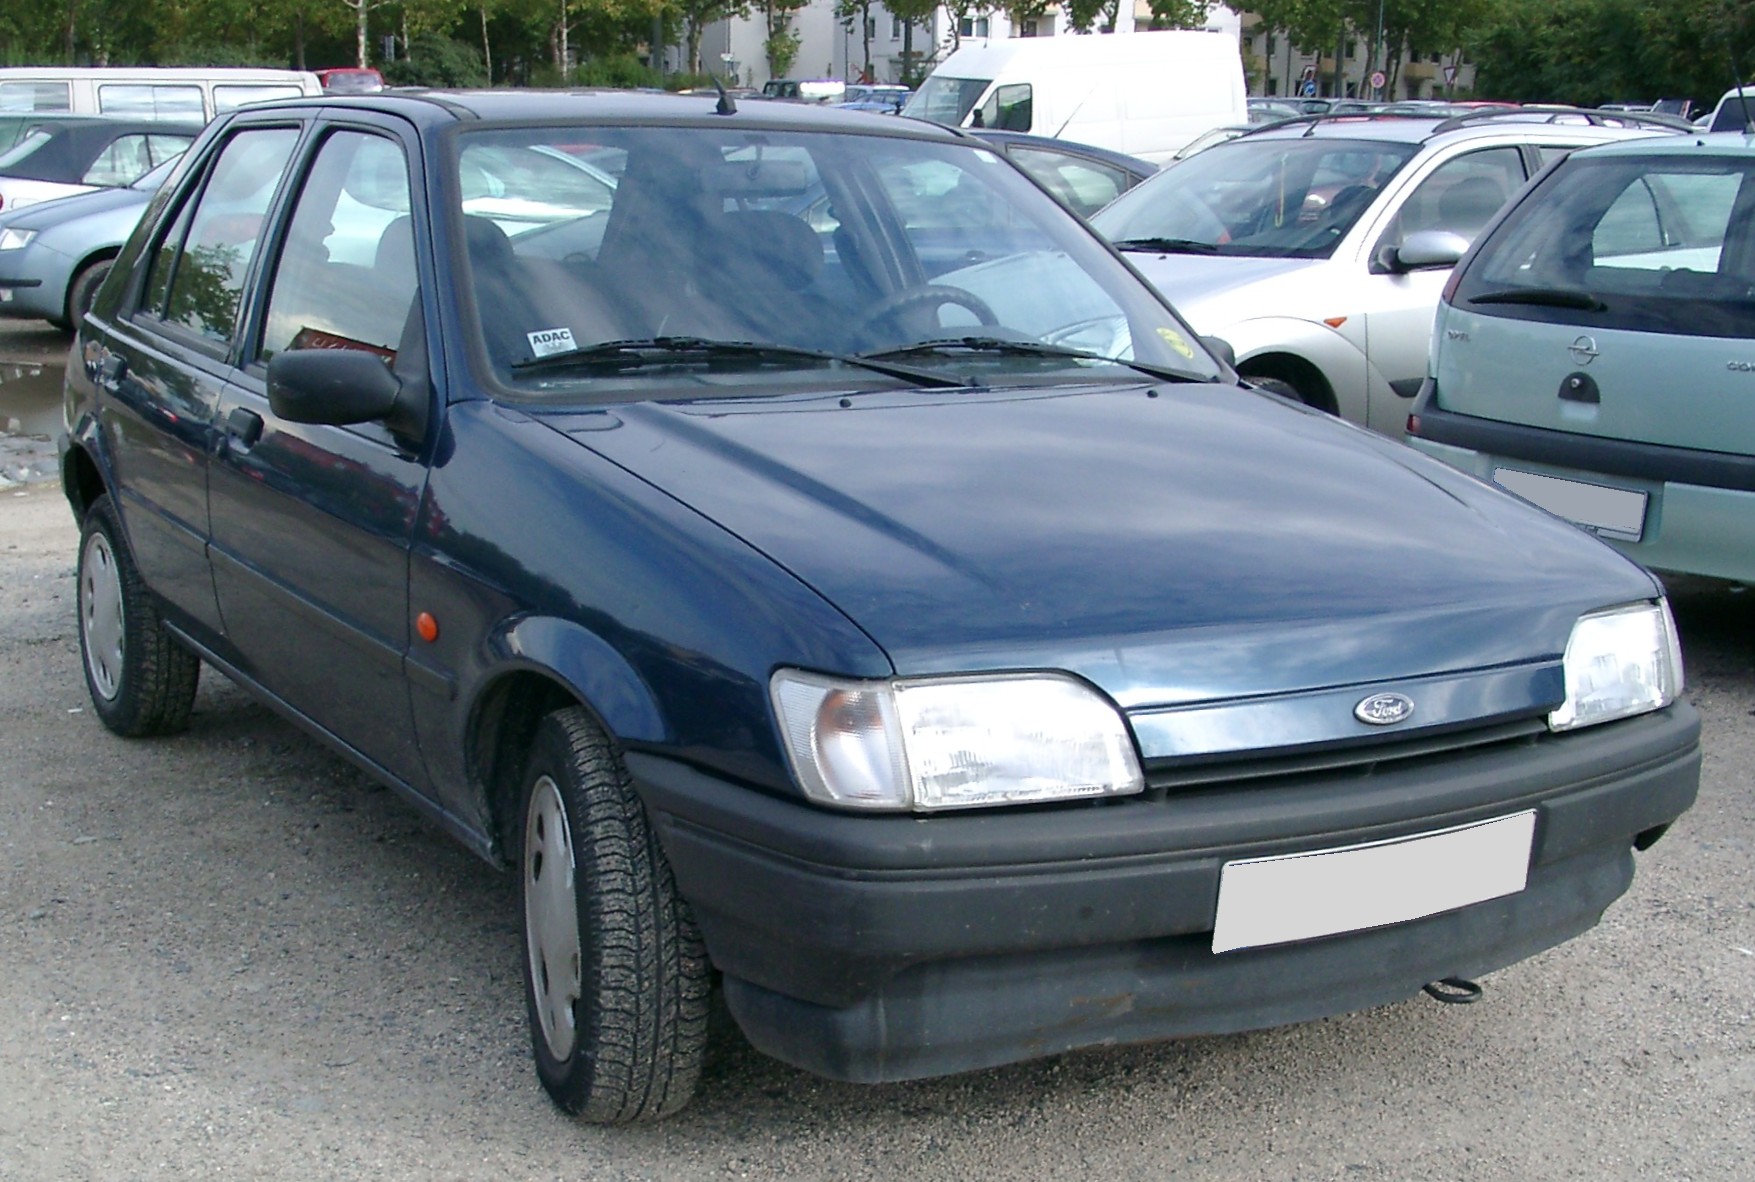 Ford Fiesta Ford First Cars